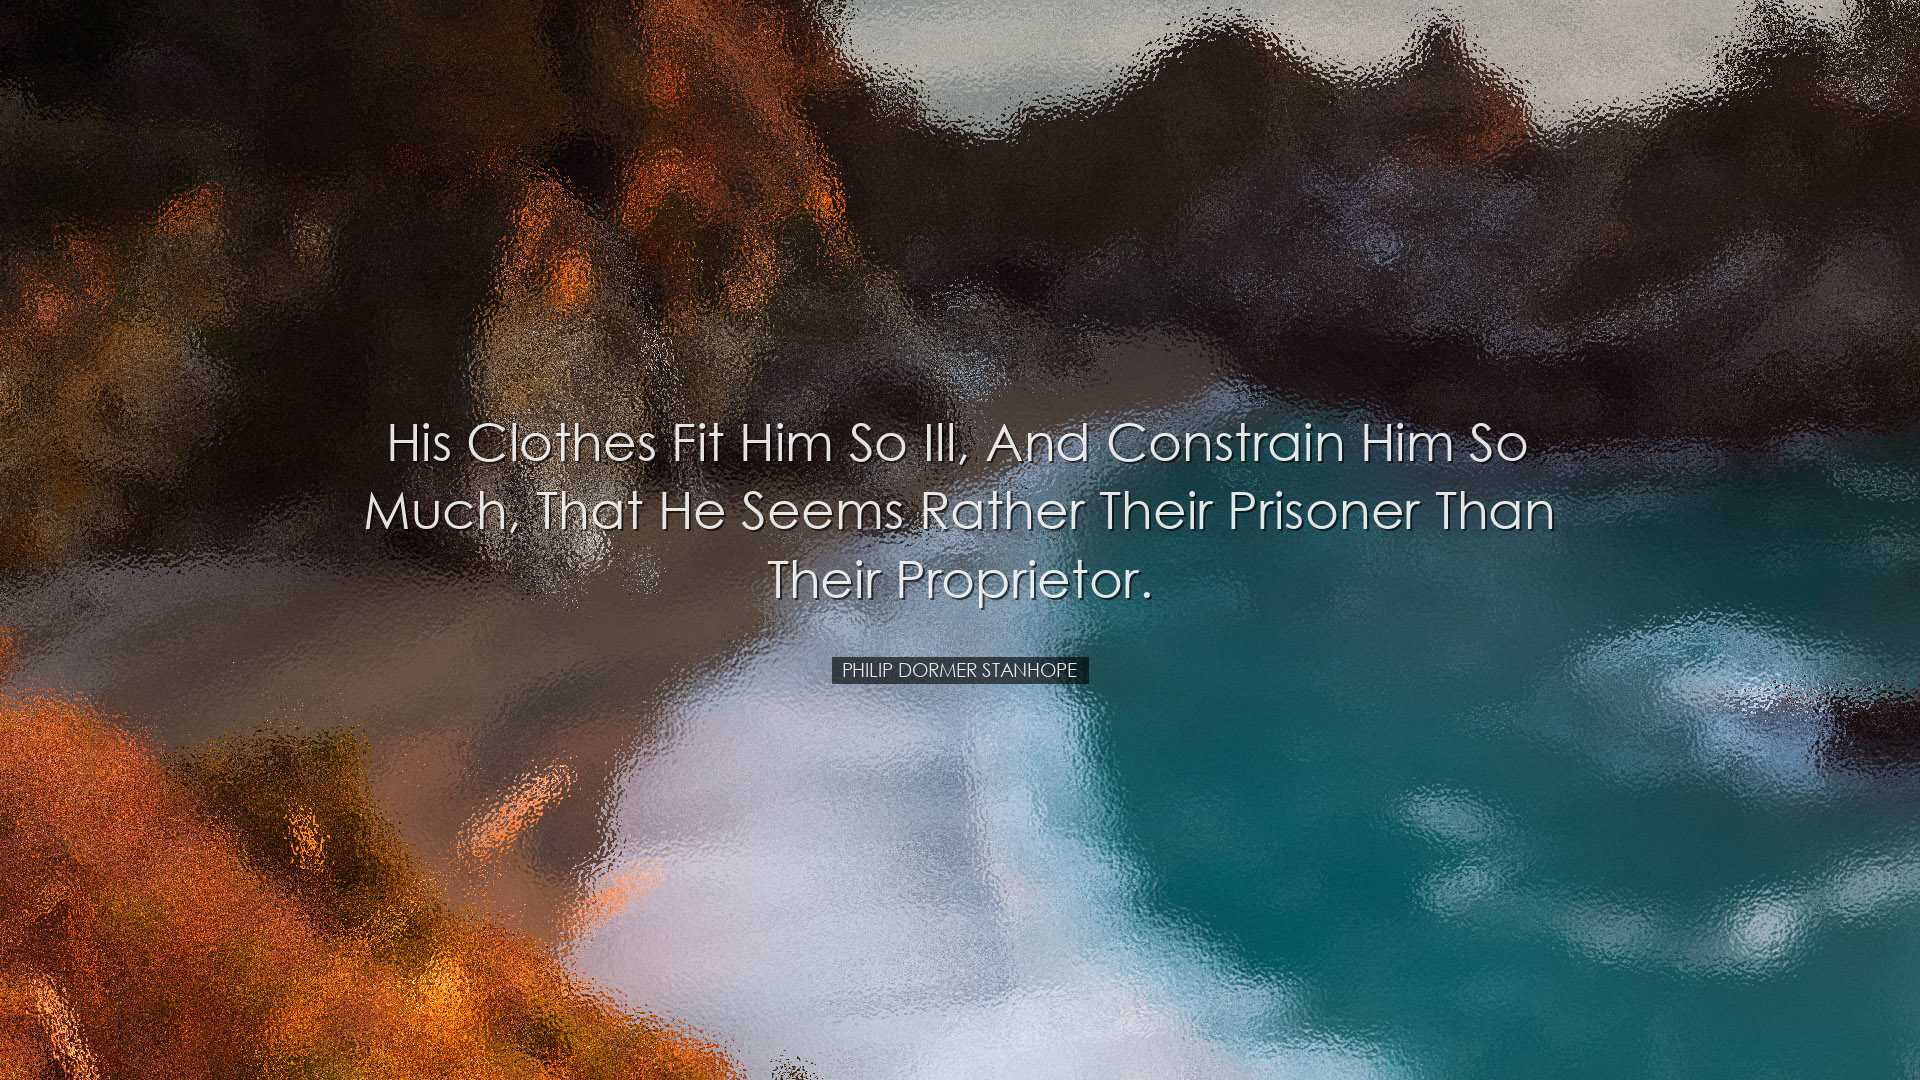 His clothes fit him so ill, and constrain him so much, that he see